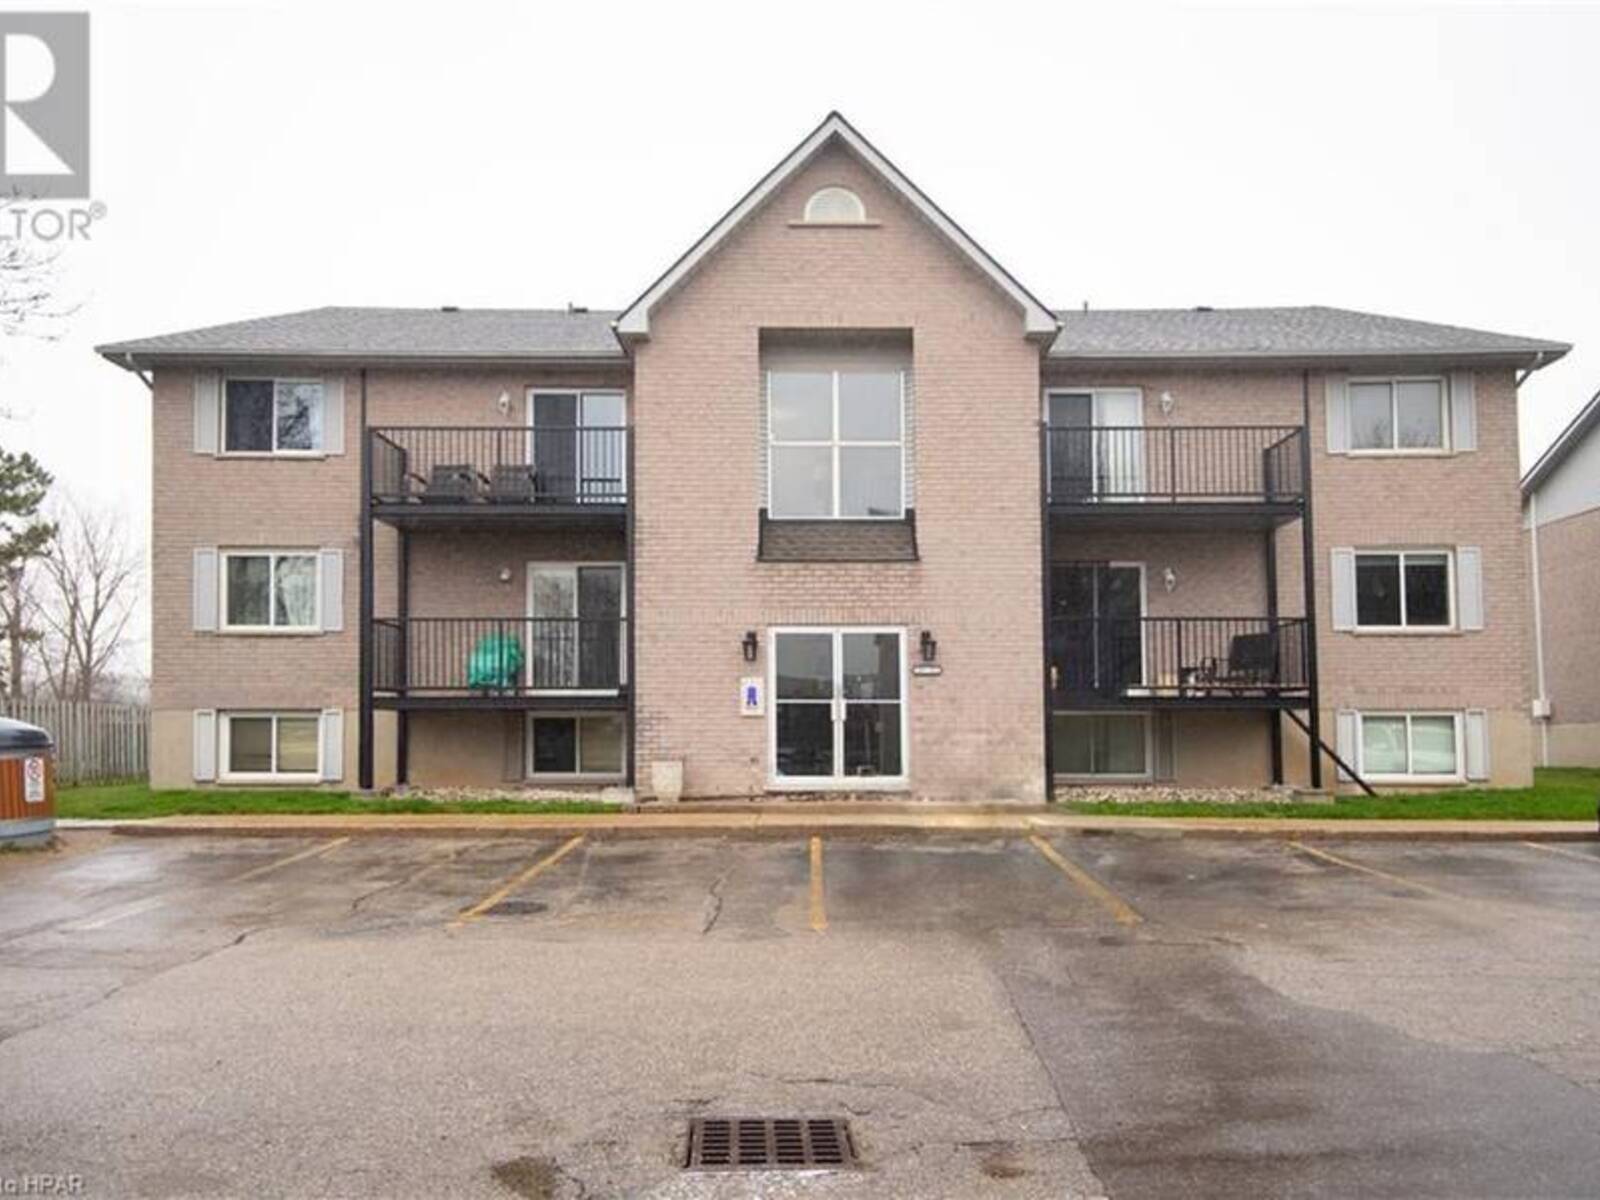 50 CAMPBELL Court Unit# 207, Stratford, Ontario N5A 7T6